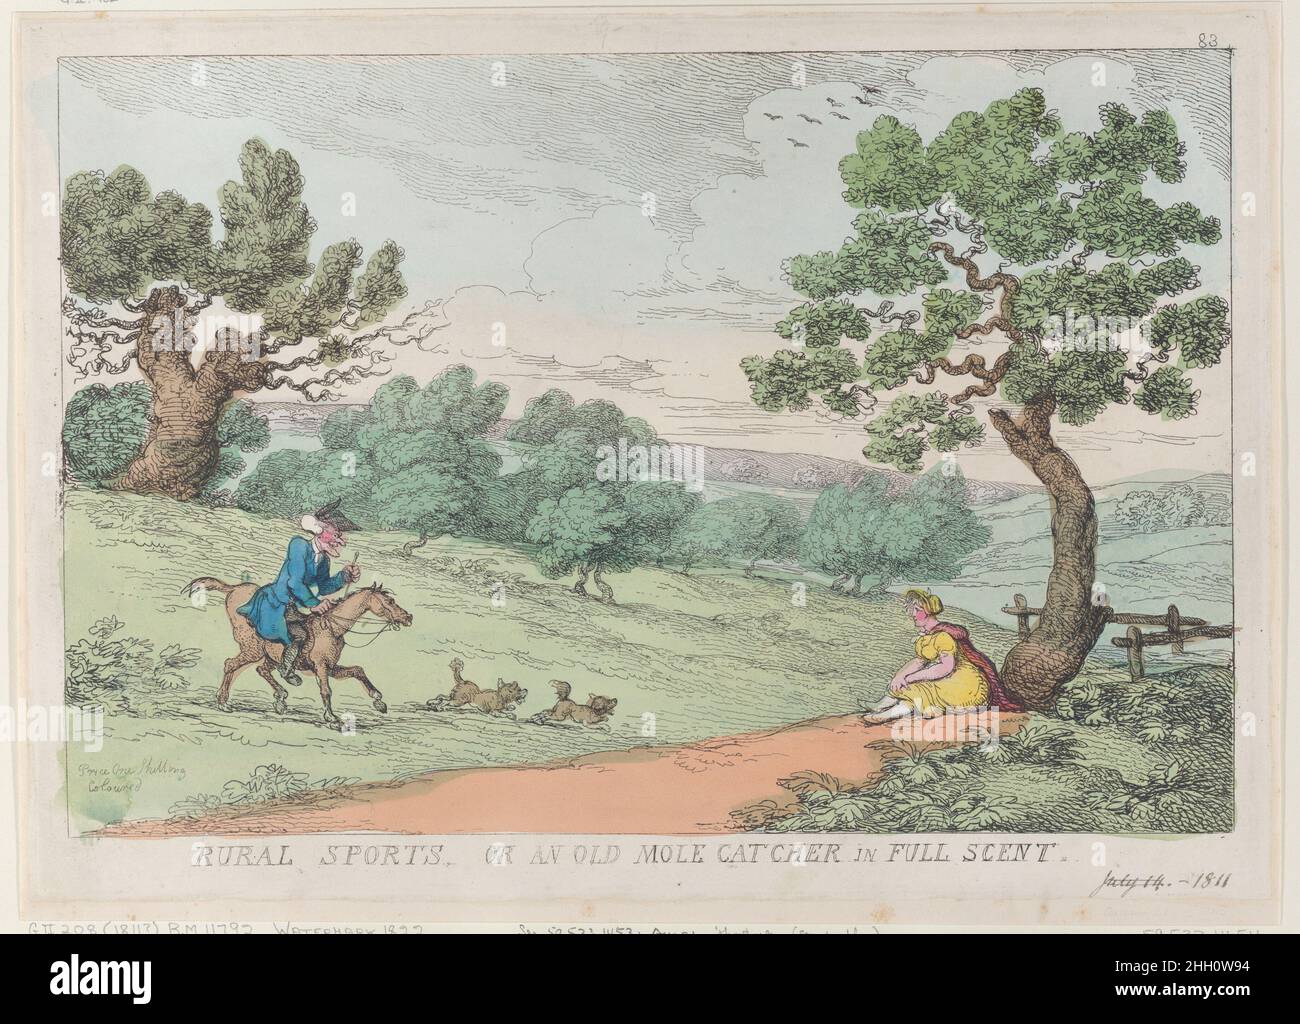 Rural Sports, or an Old Mole Catcher in Full Scent [1811], reprint Thomas Rowlandson An elderly man on a horse rides in a hilly landscape with two dogs before him, and approaches a girl seated beneath a tree at right.. Rural Sports, or an Old Mole Catcher in Full Scent. Thomas Rowlandson (British, London 1757–1827 London). [1811], reprint. Hand-colored etching. Thomas Tegg (British, 1776–1846). Prints Stock Photo